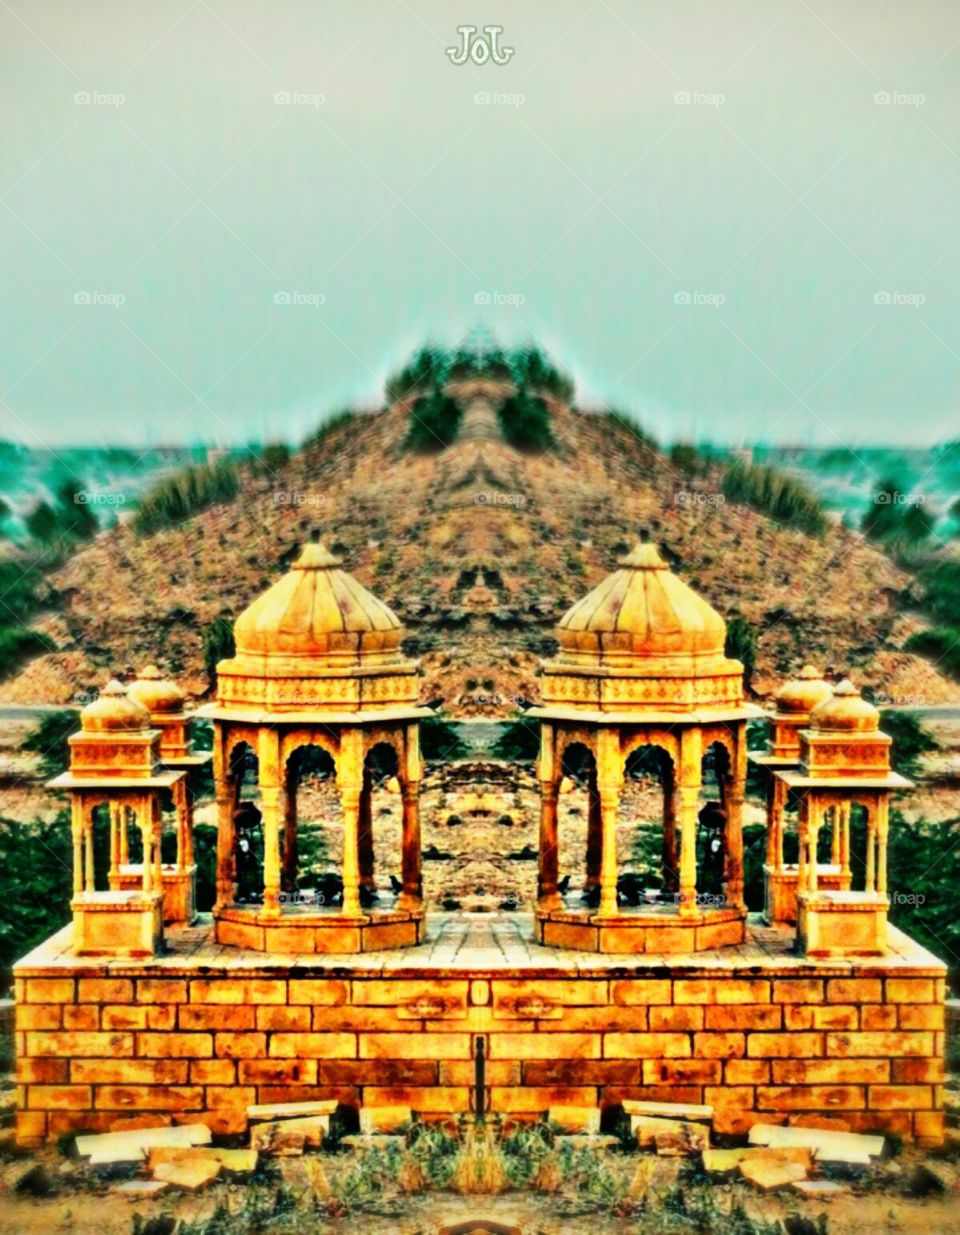 Jodhpur Fort in an unique photo